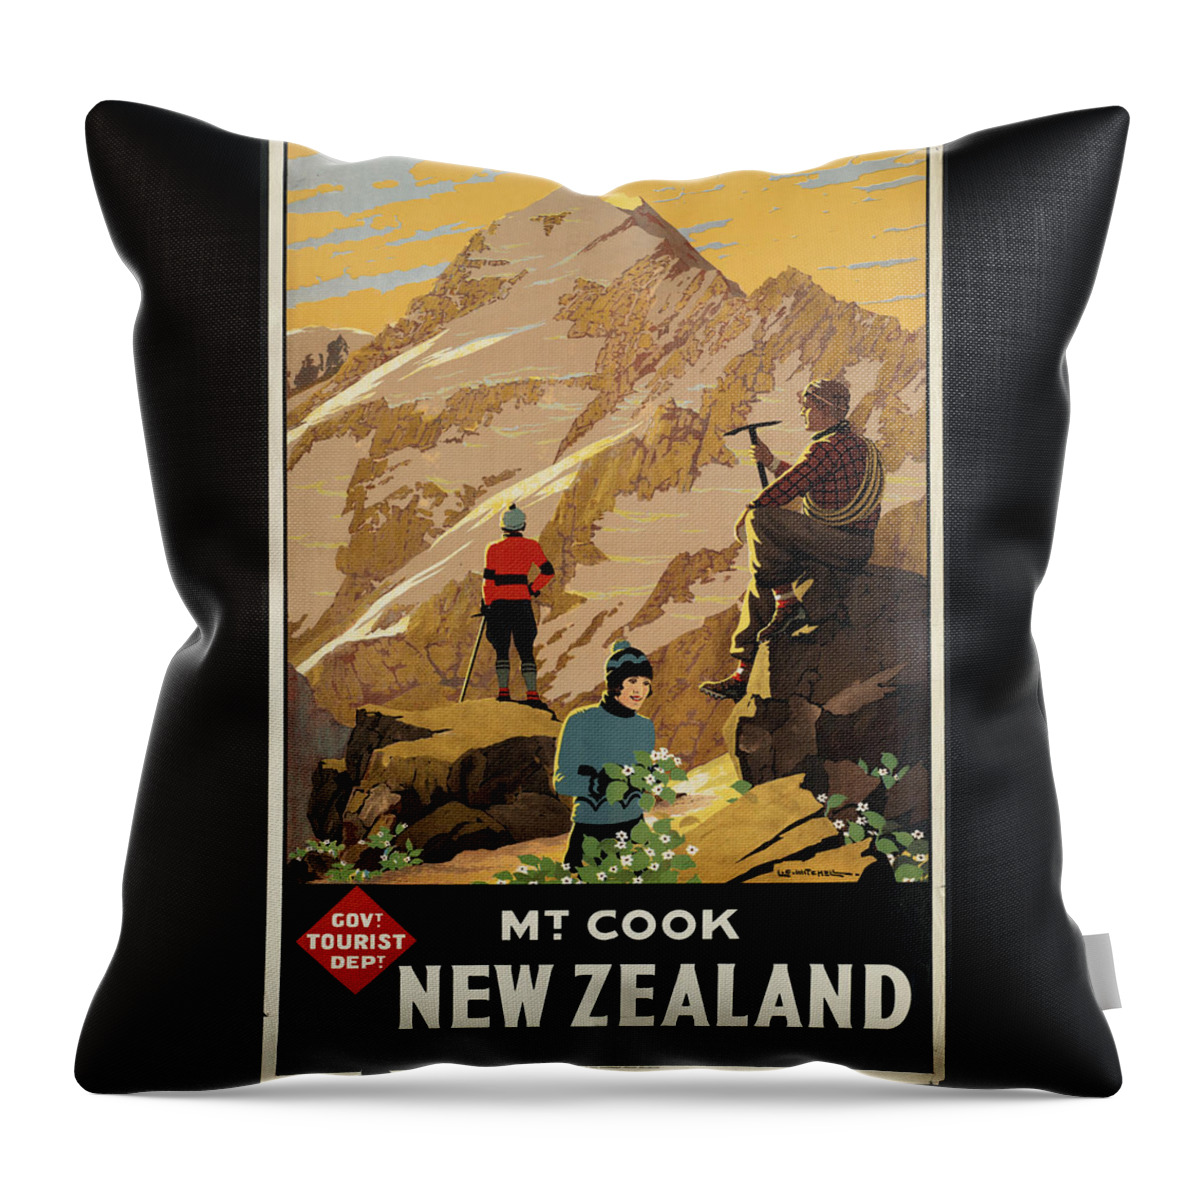 Public-domain-images-free-vintage-posters-0183 Throw Pillow featuring the painting Public Domain Images #188 by MotionAge Designs